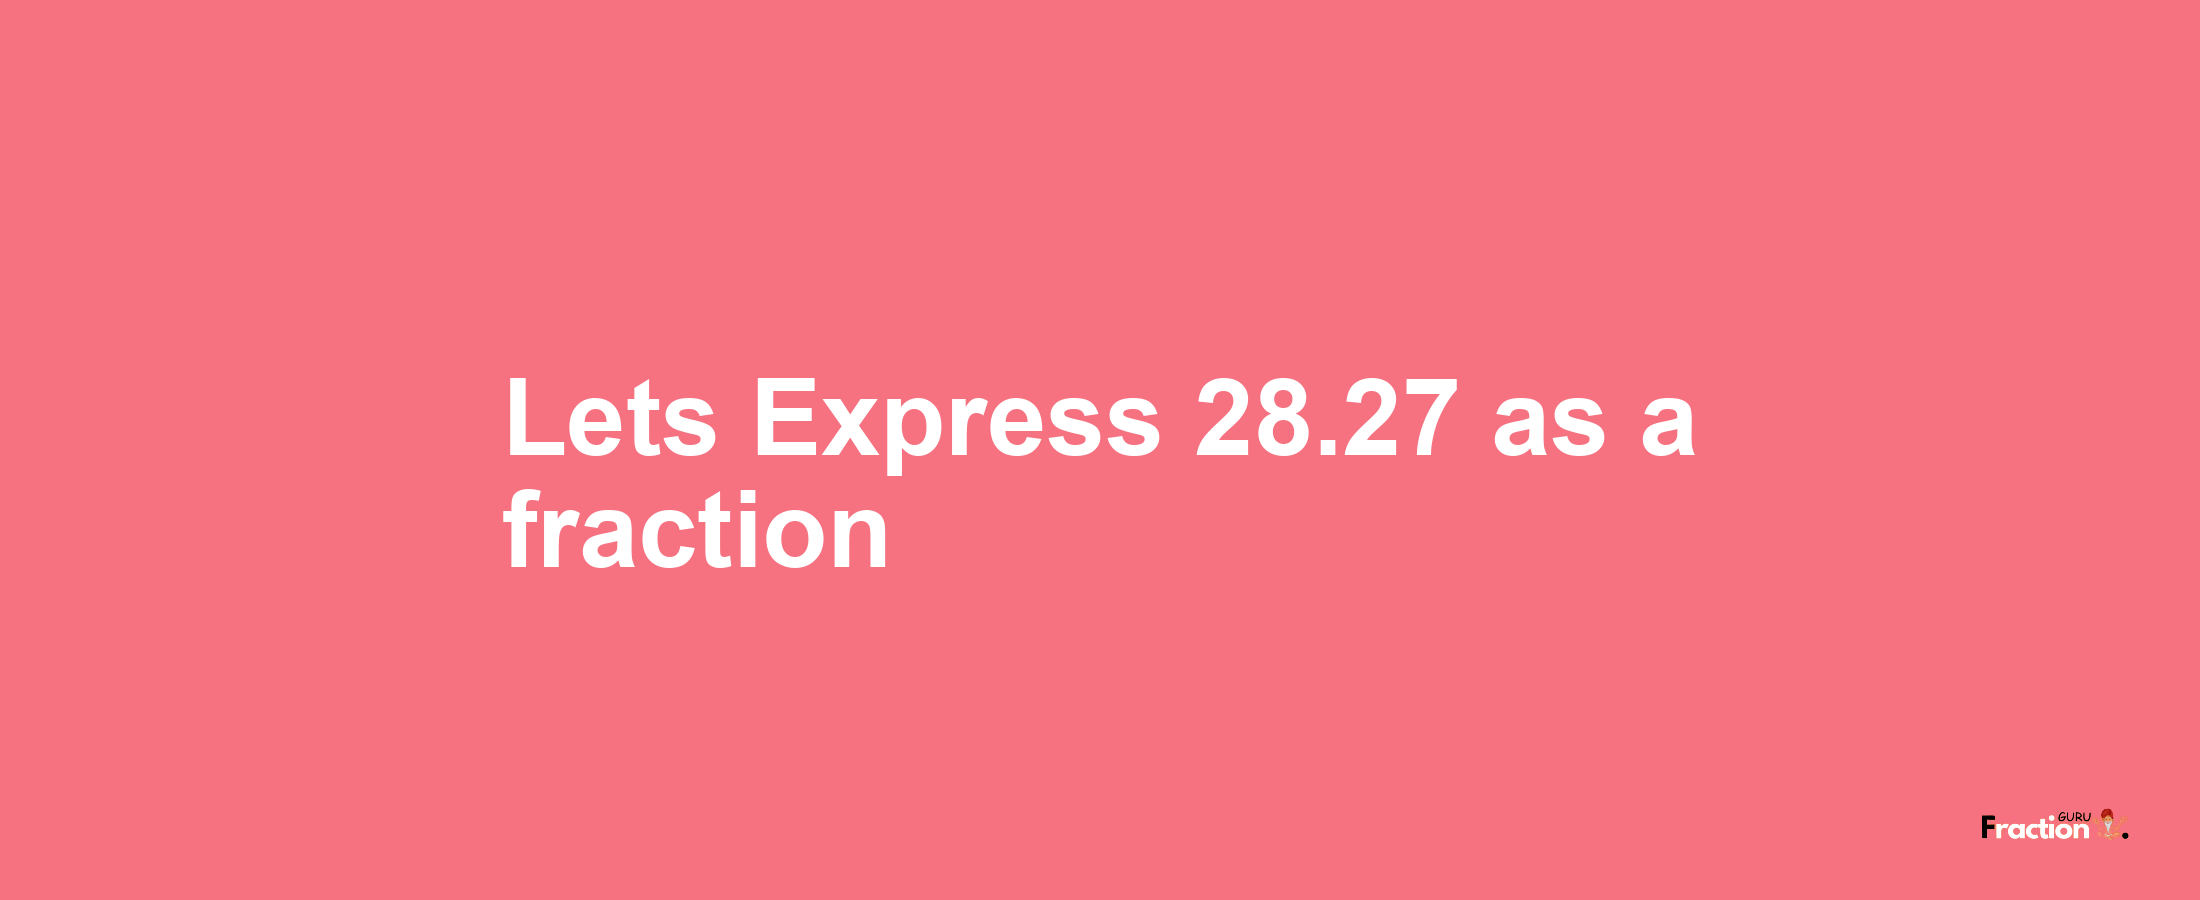 Lets Express 28.27 as afraction